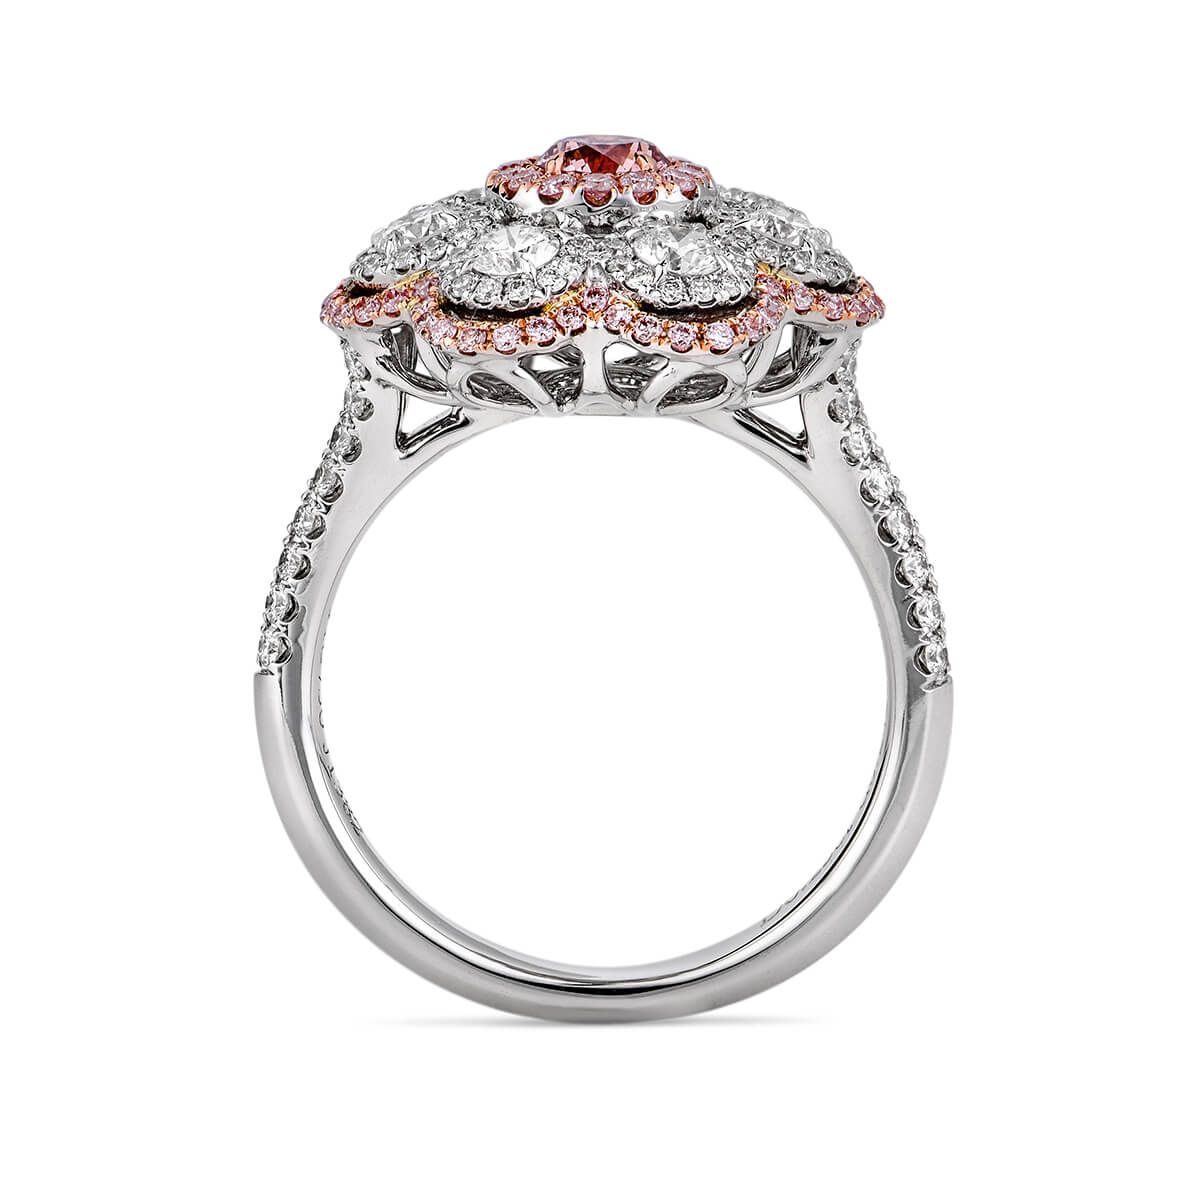 Fancy Pink Diamond Ring, 0.25 Ct. (1.39 Ct. TW), Round shape, GIA Certified, 5171927907